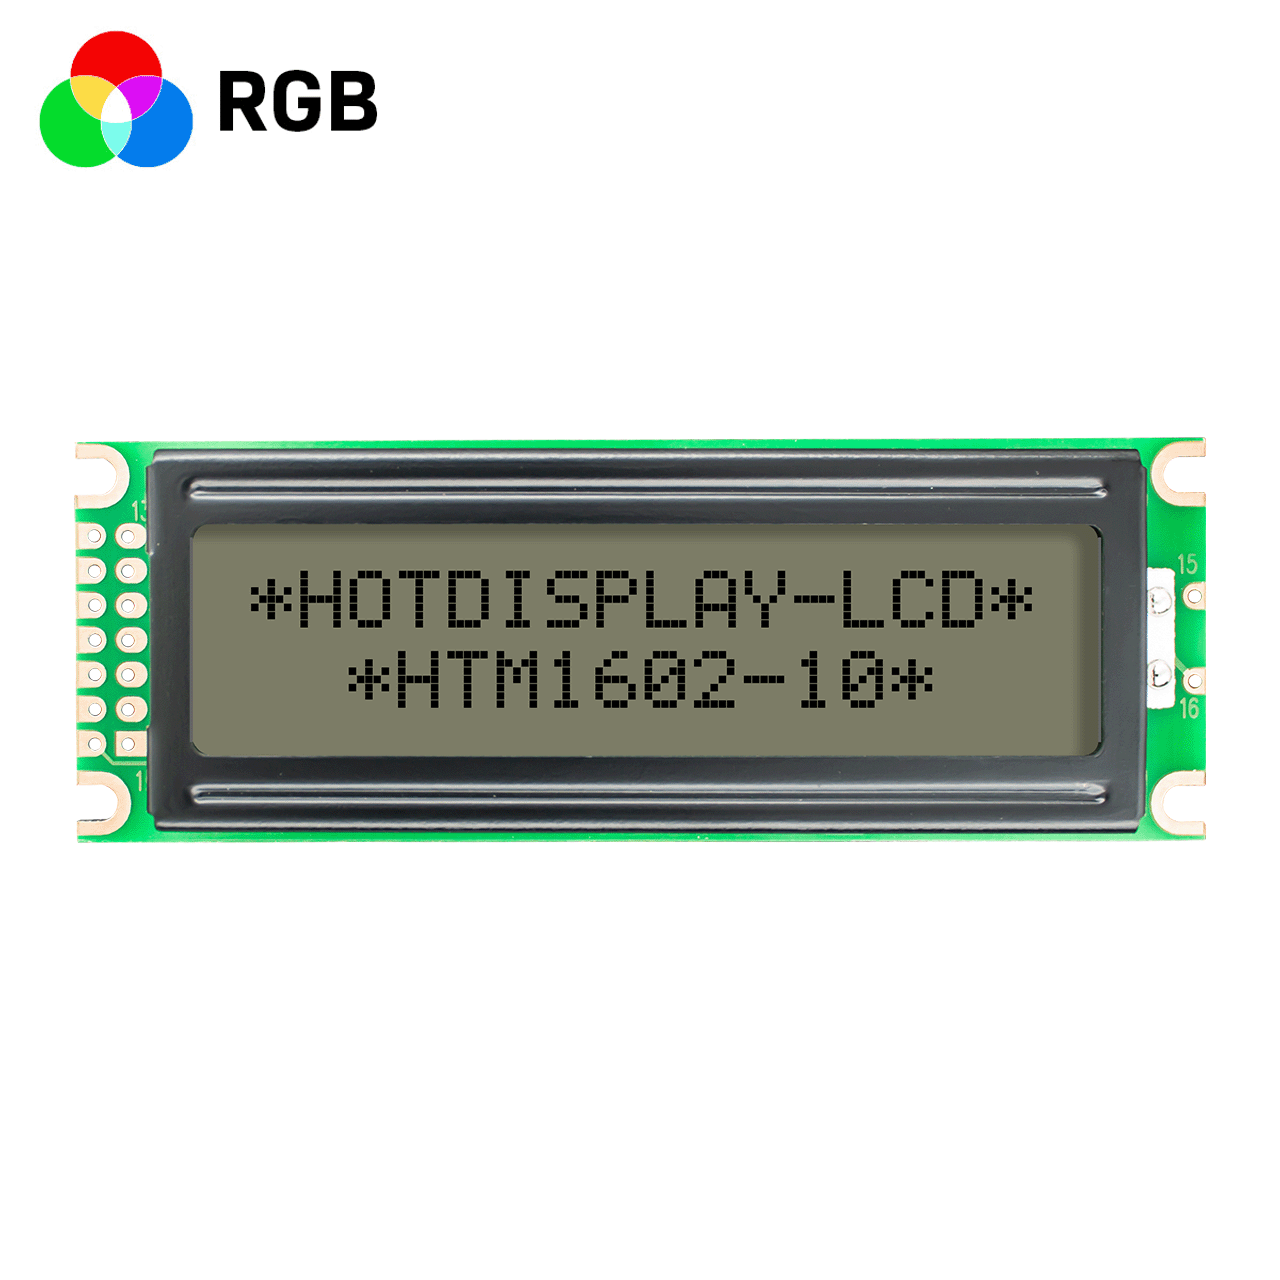 LCD module monochrome display 16x2 characters FSTN+ with RGB yellow, green and blue backlight-Arduino